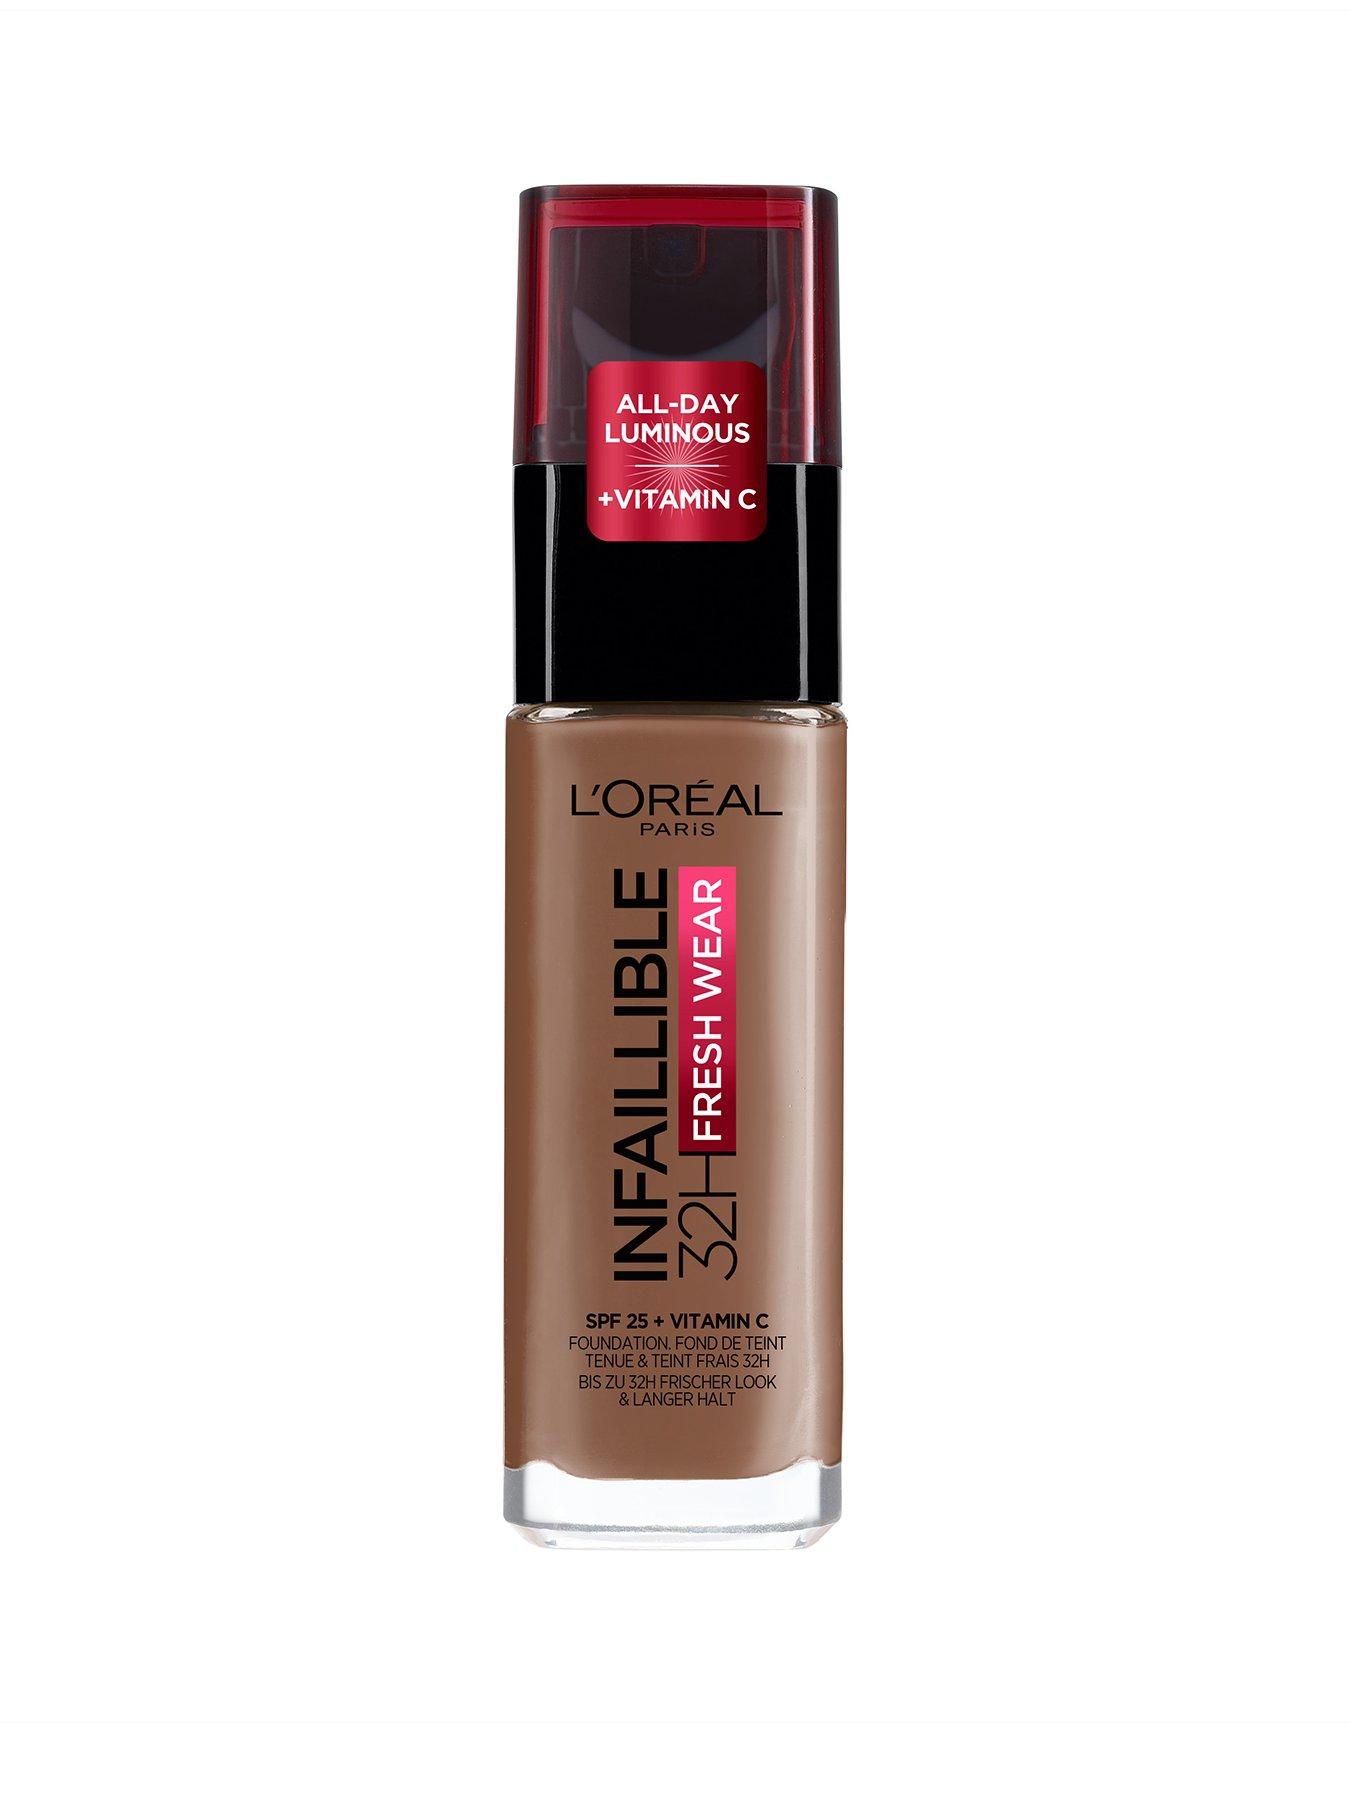  Maybelline Super Stay Up to 24HR Skin Tint, Radiant  Light-to-Medium Coverage Foundation, Makeup Infused With Vitamin C, 129, 1  Count : Beauty & Personal Care